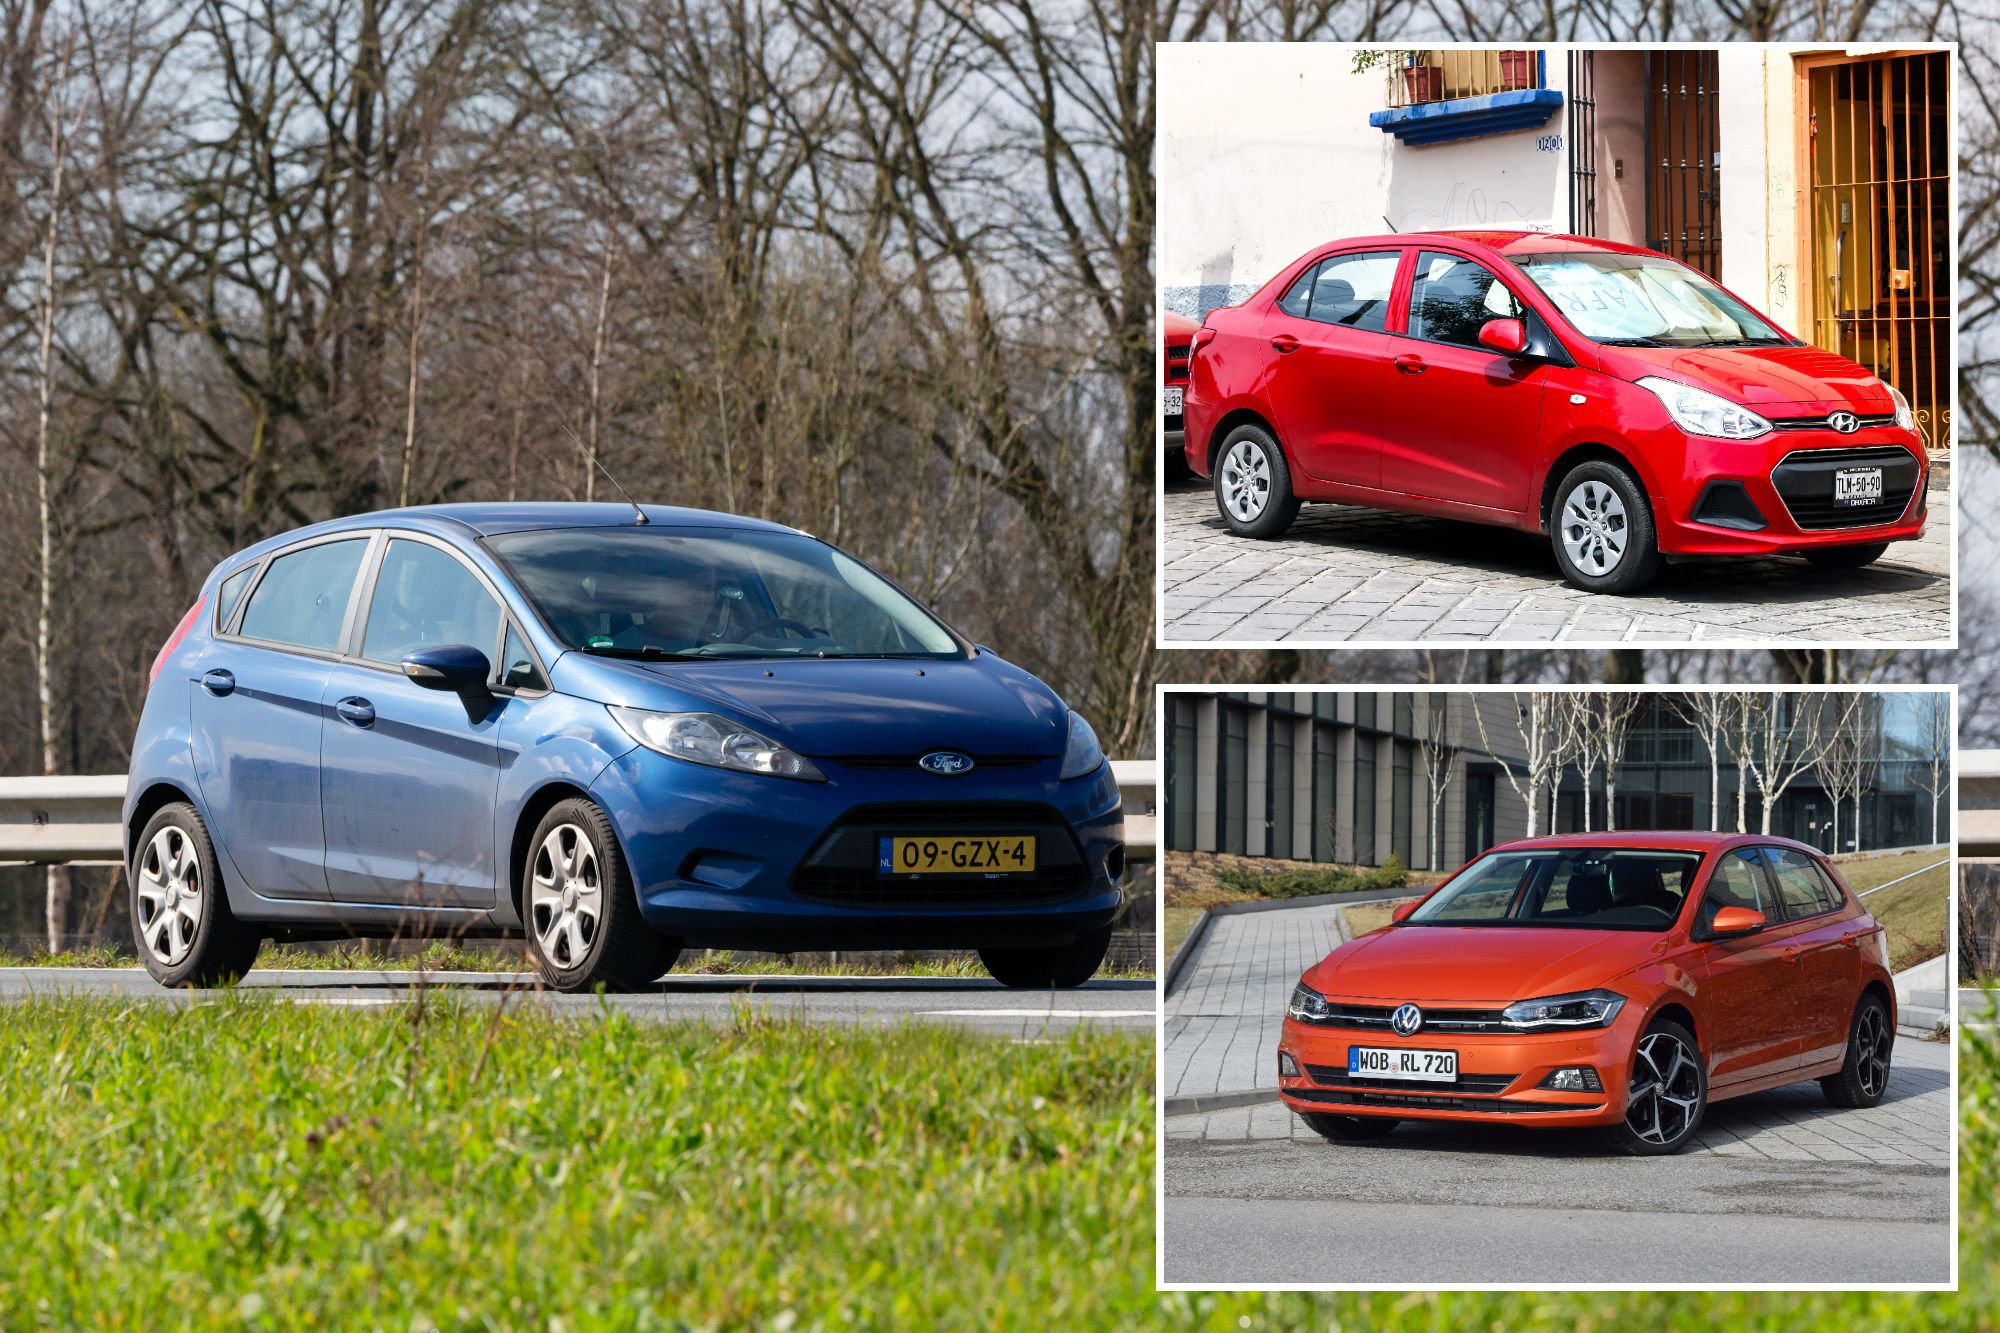 The five cheapest cars to insure that you can buy for under £3,000